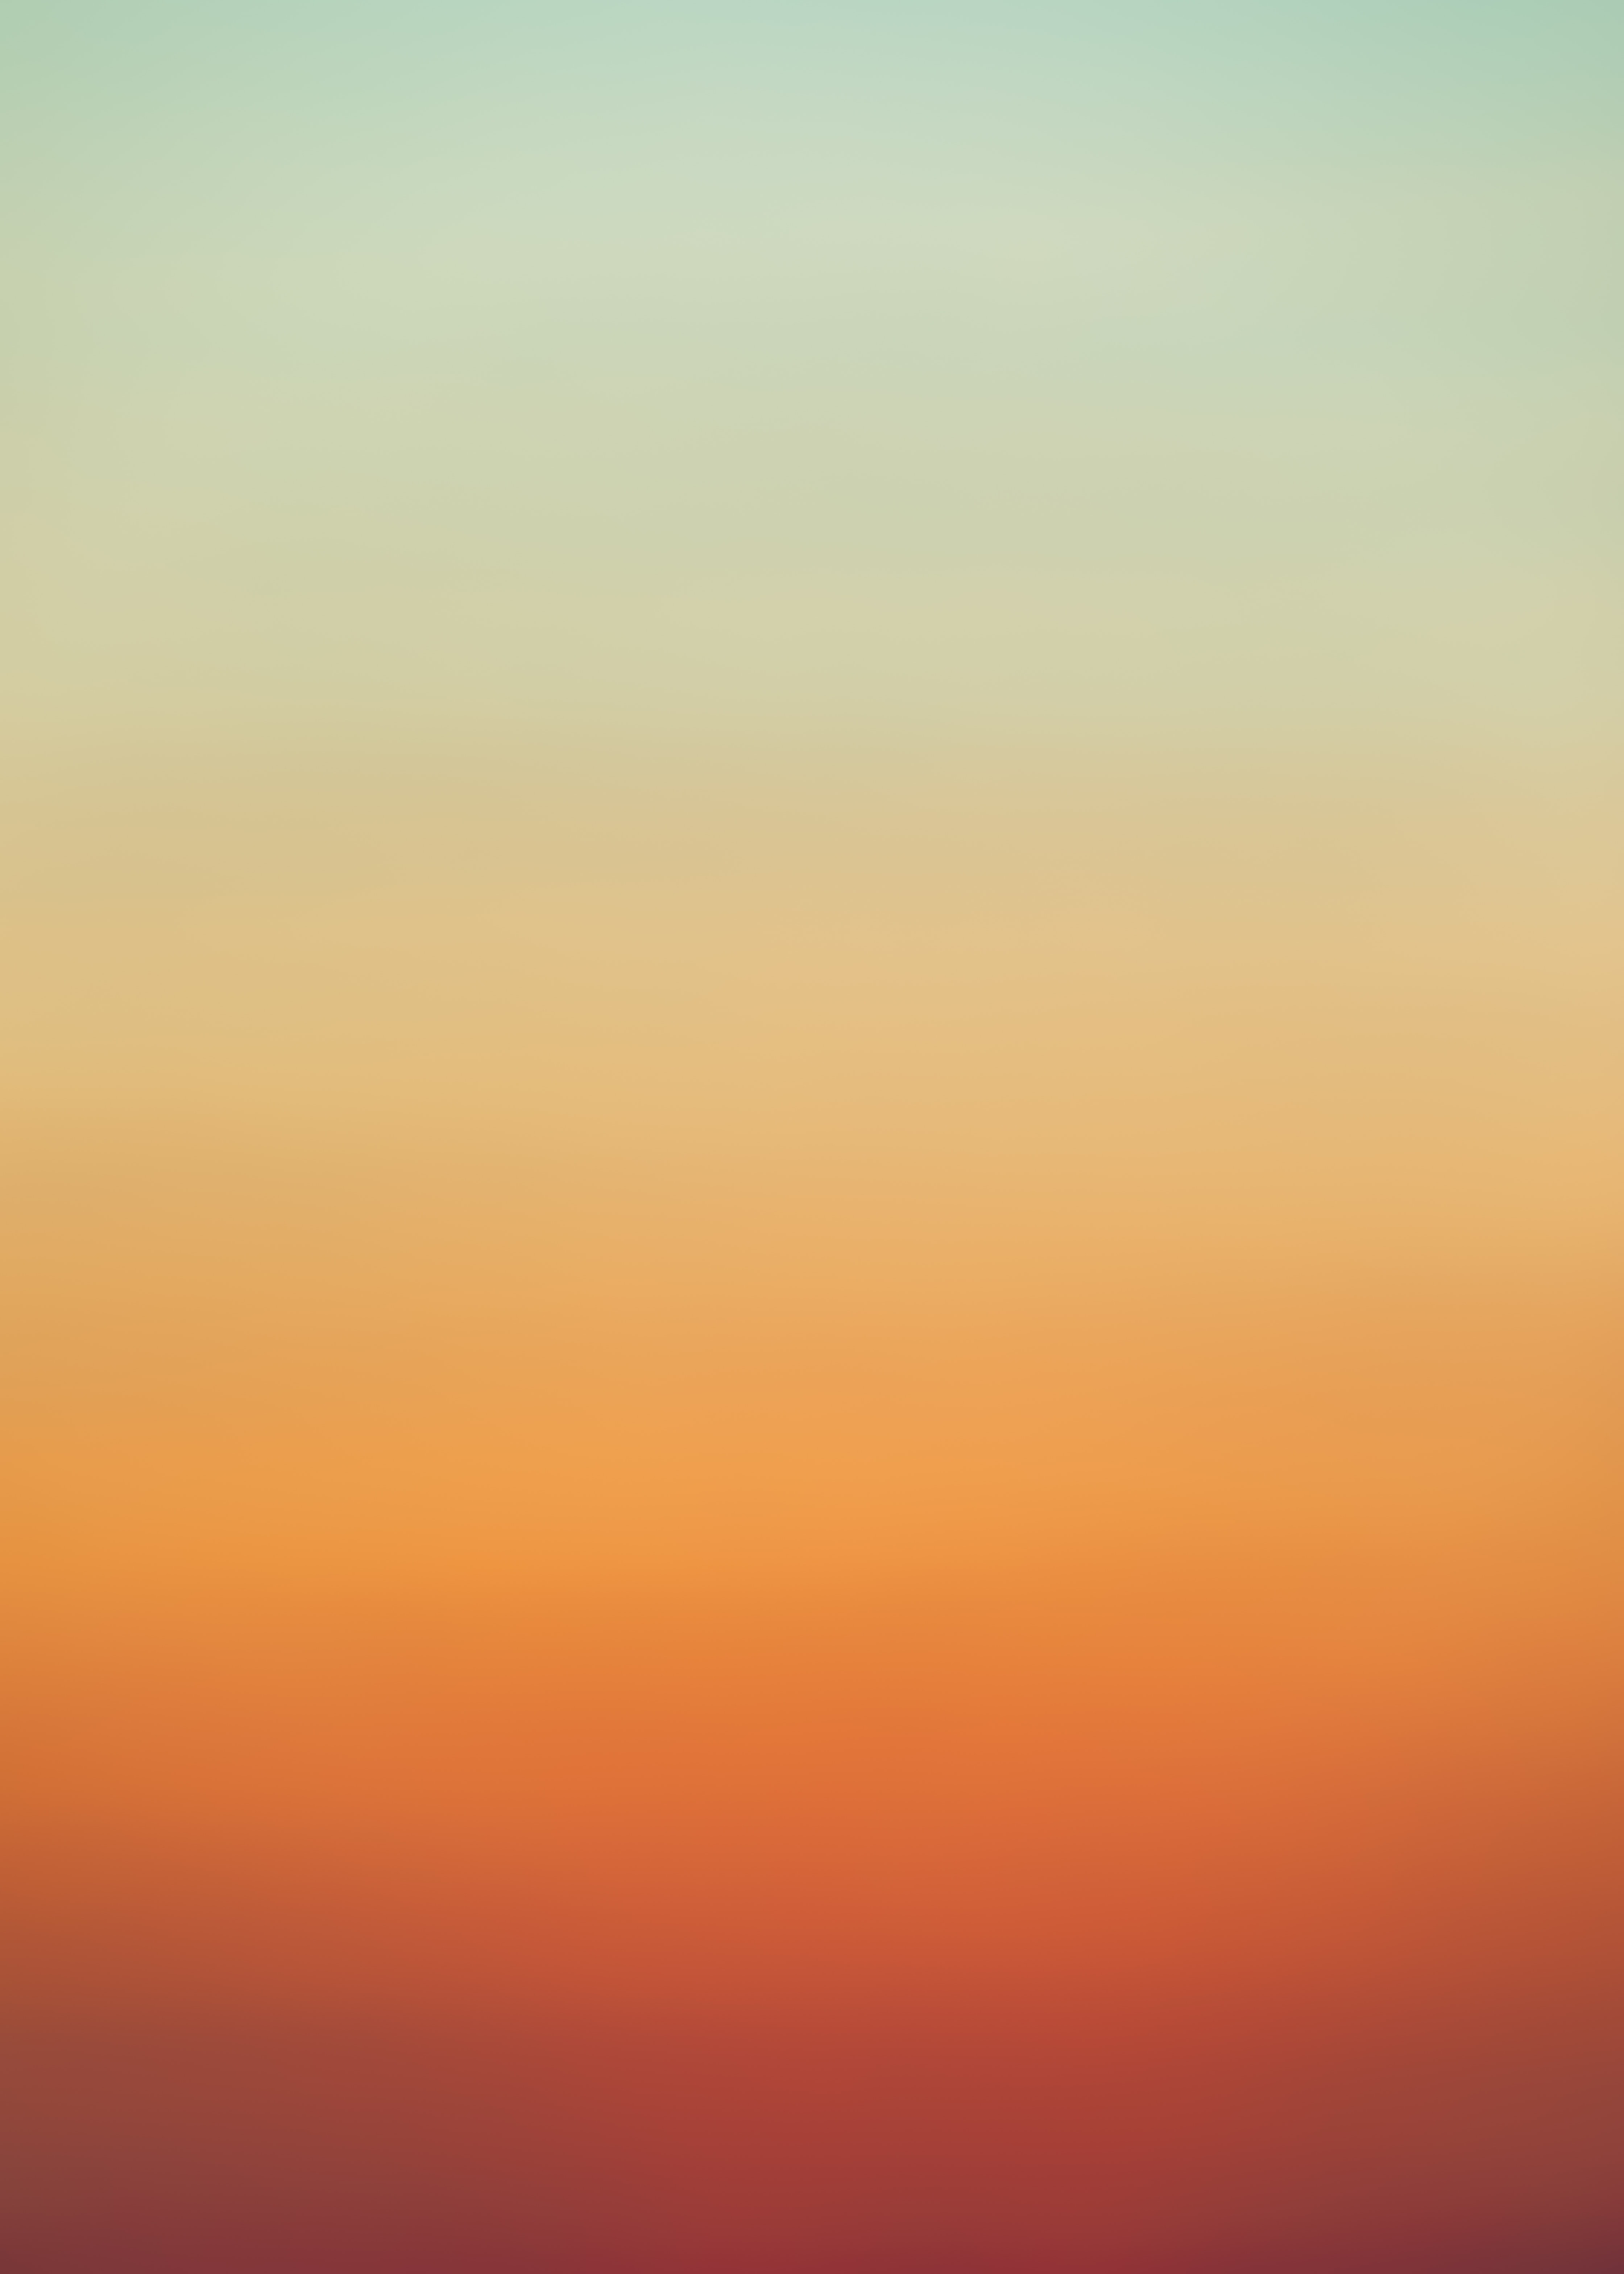 gradient, abstract, background, yellow, orange, color QHD